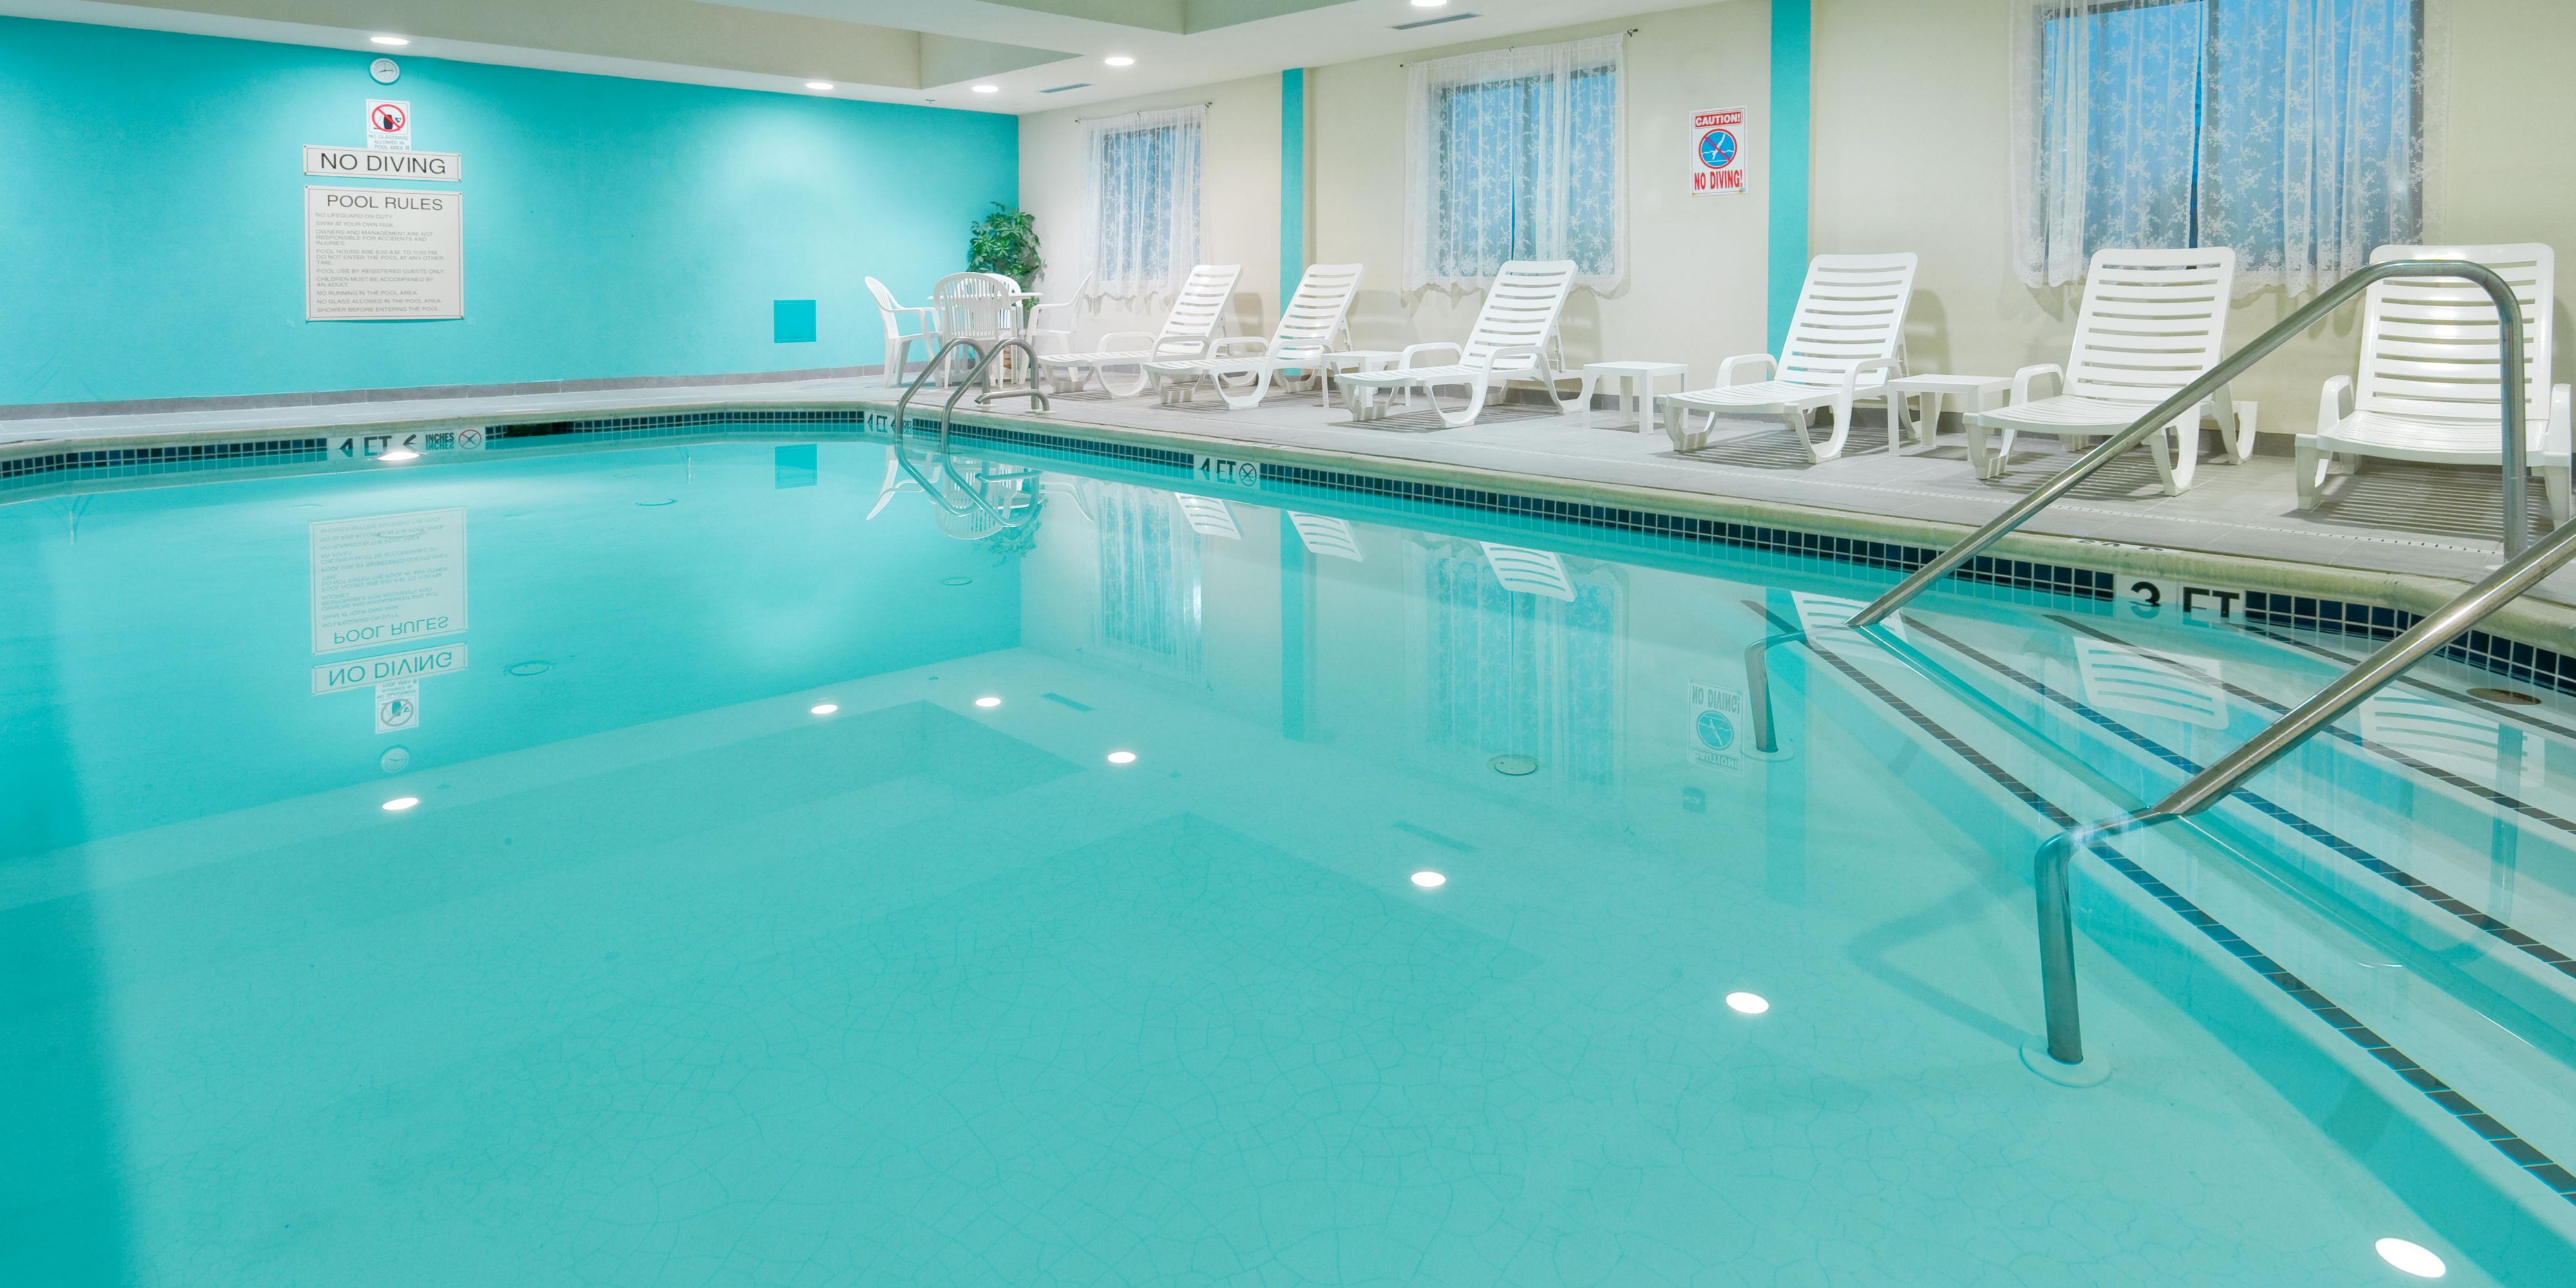 Come take a refreshing dip in our sparkling, heated indoor pool!